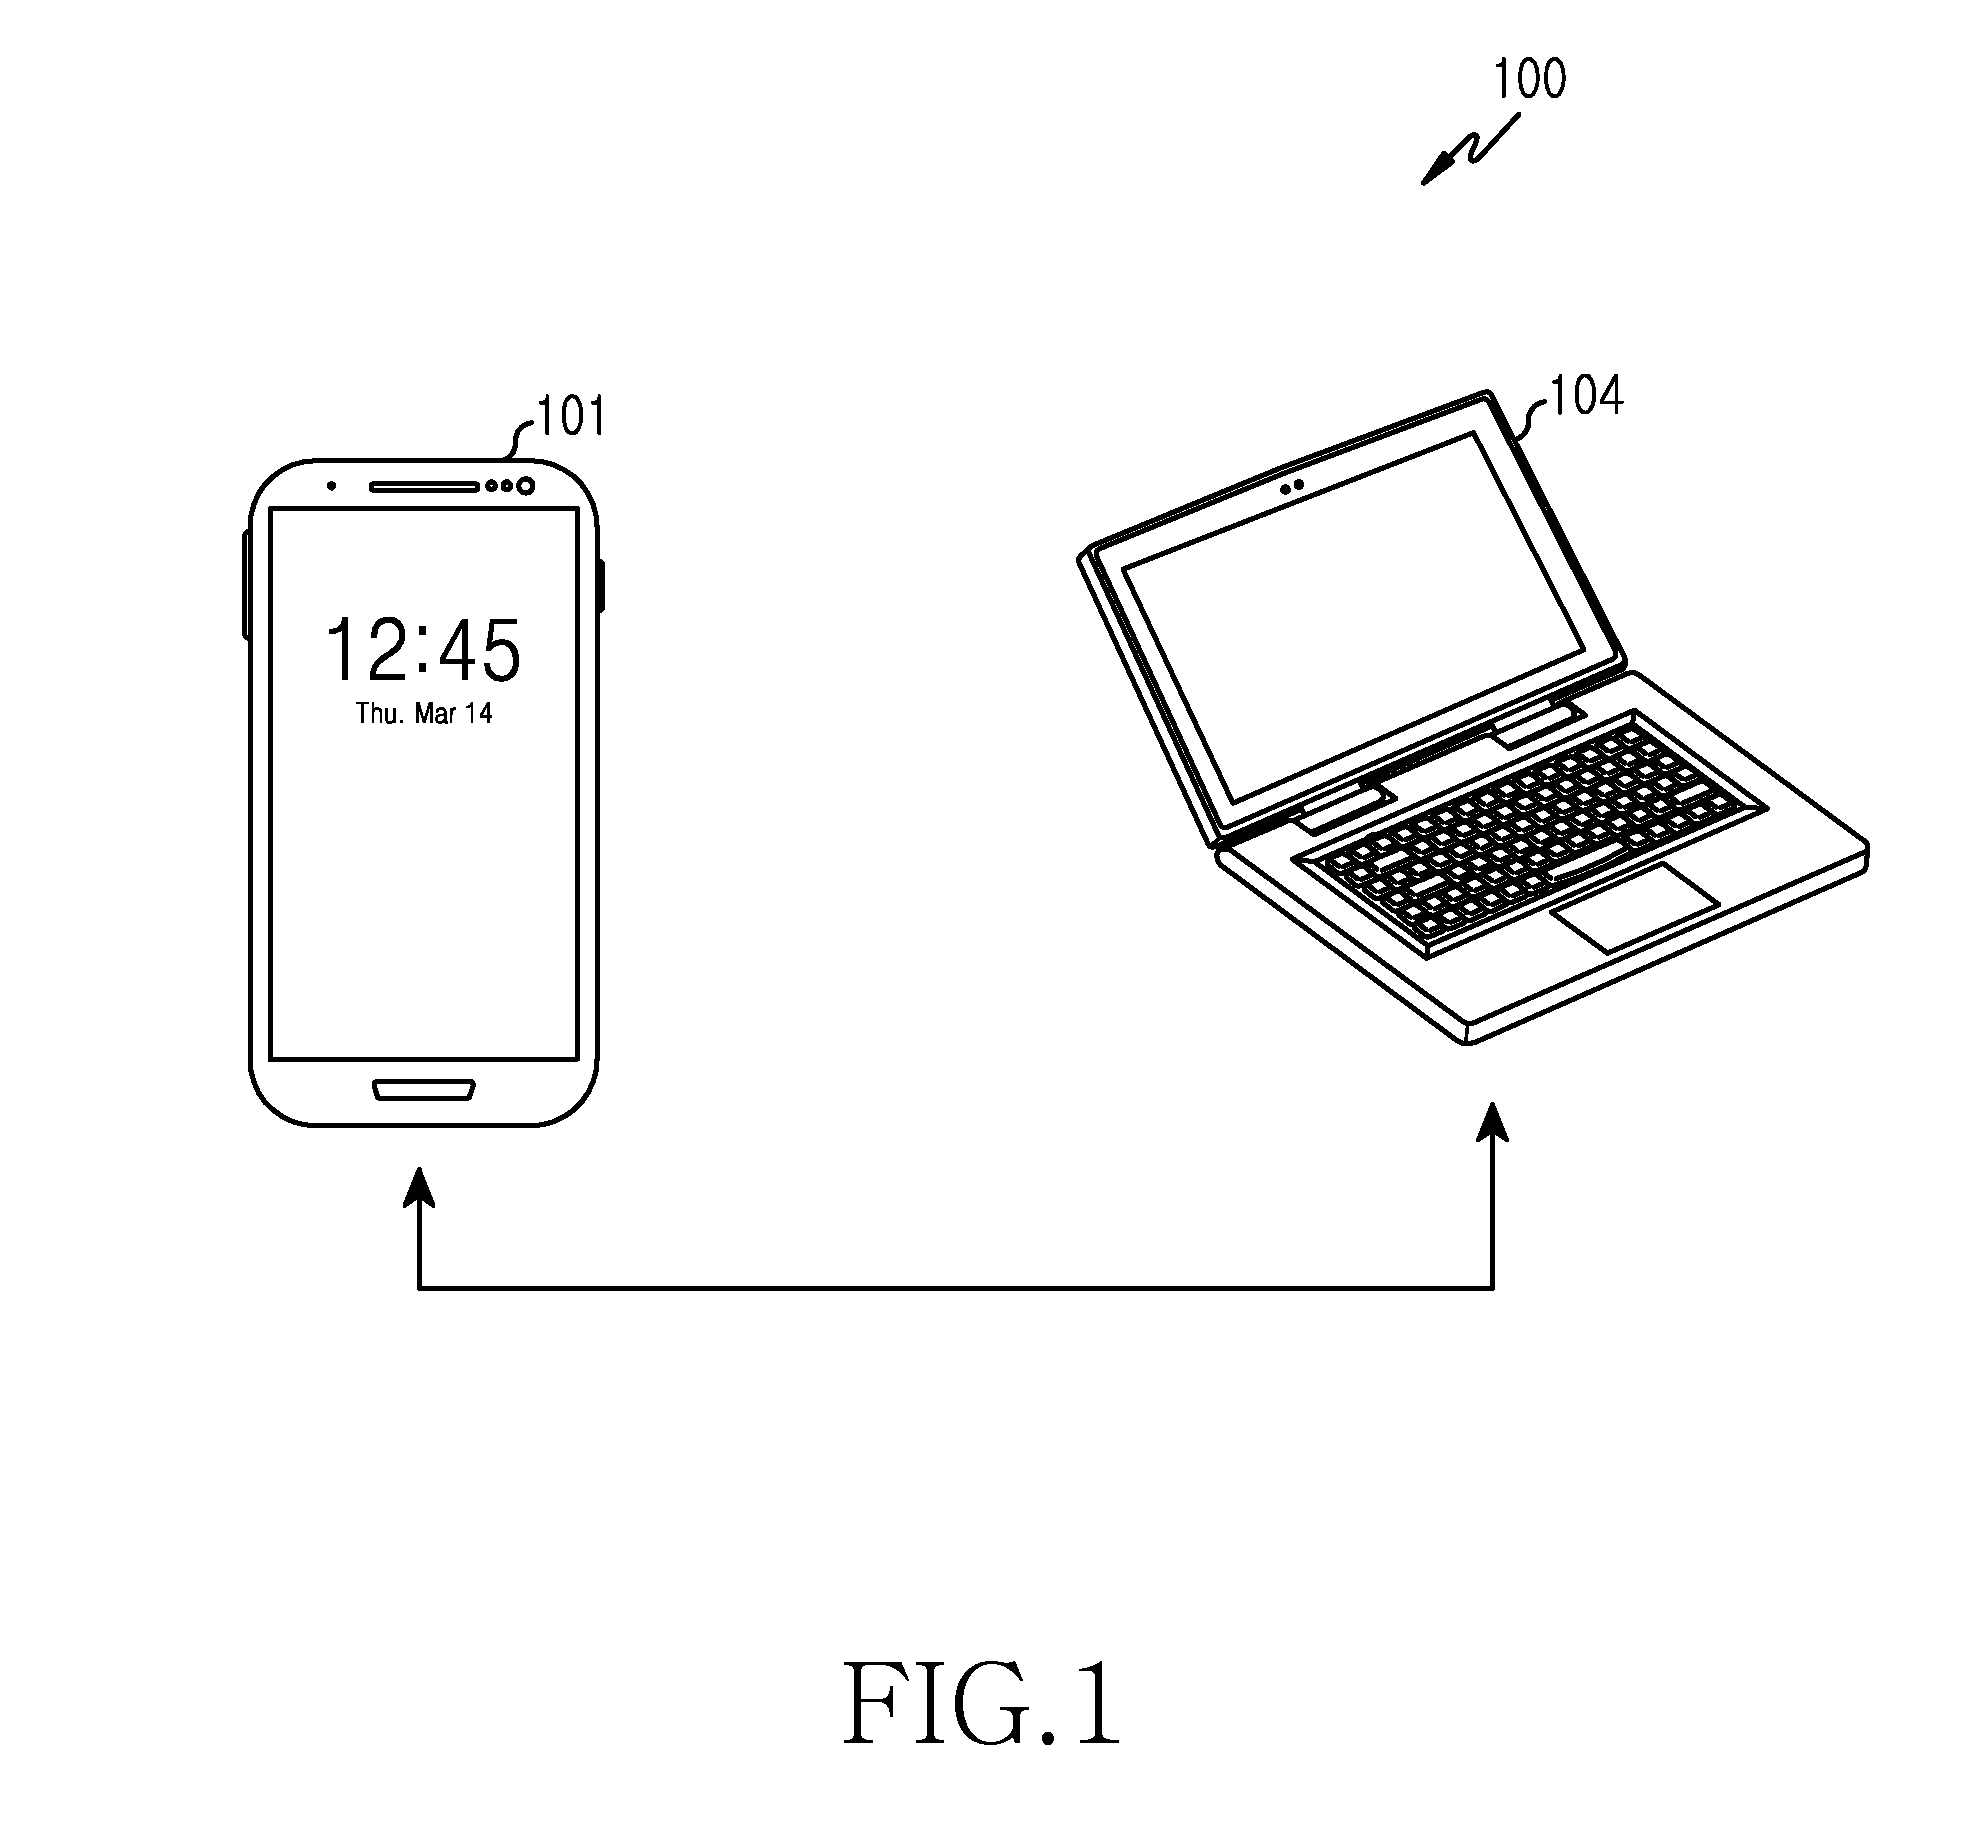 Method and apparatus for sharing content between electronic devices